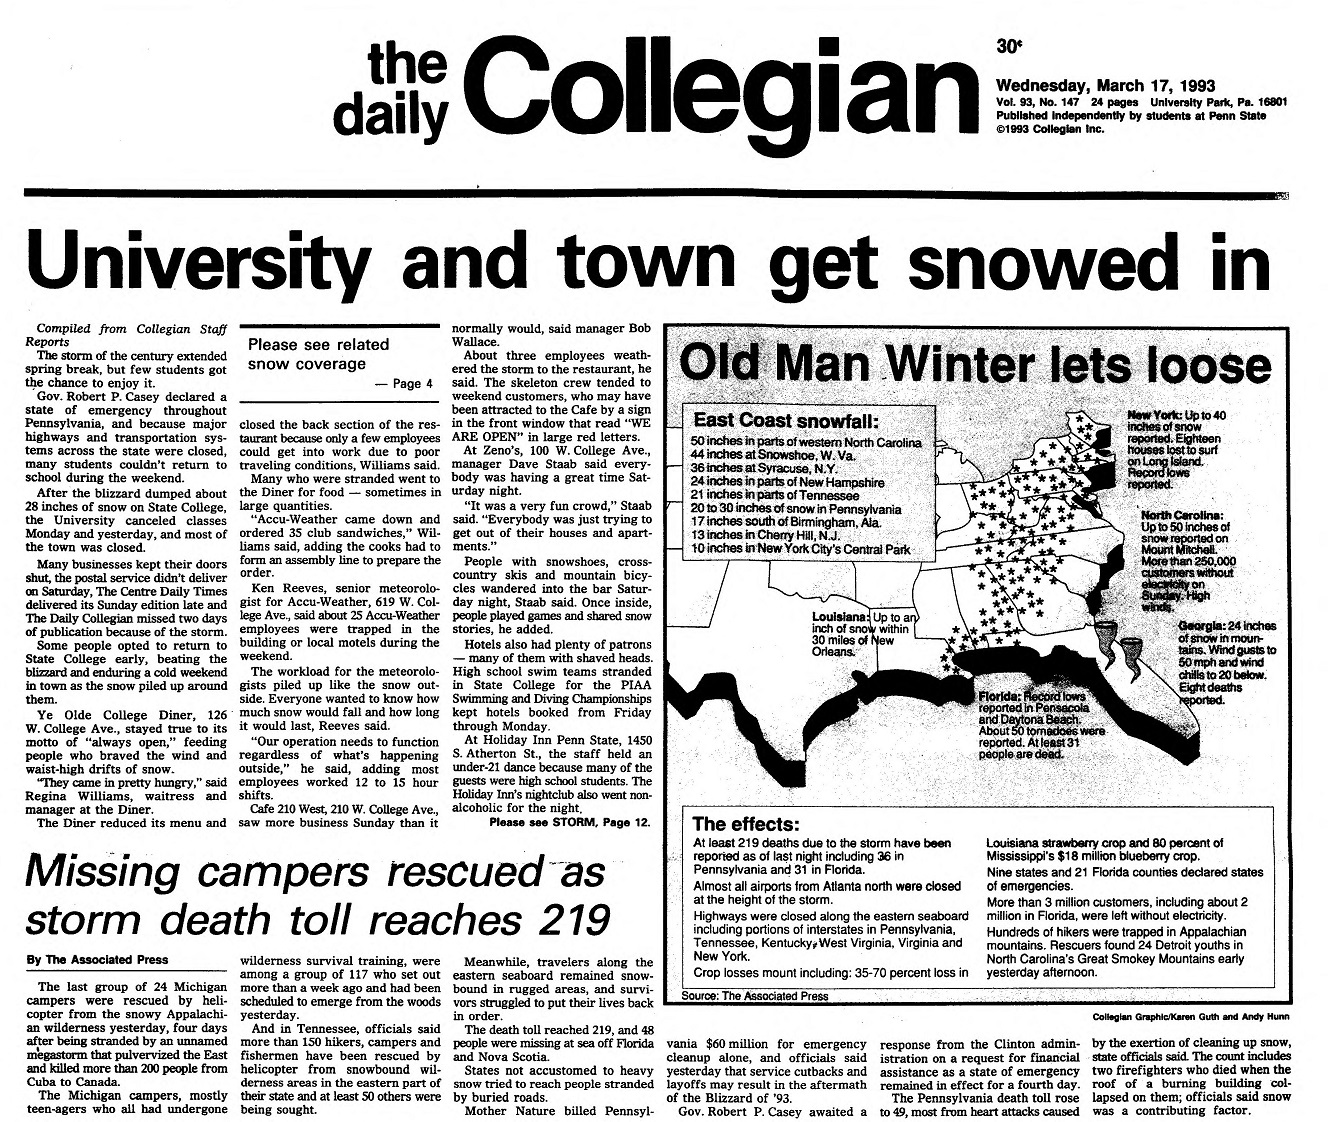 Daily Collegian Front Page March 17, 1993